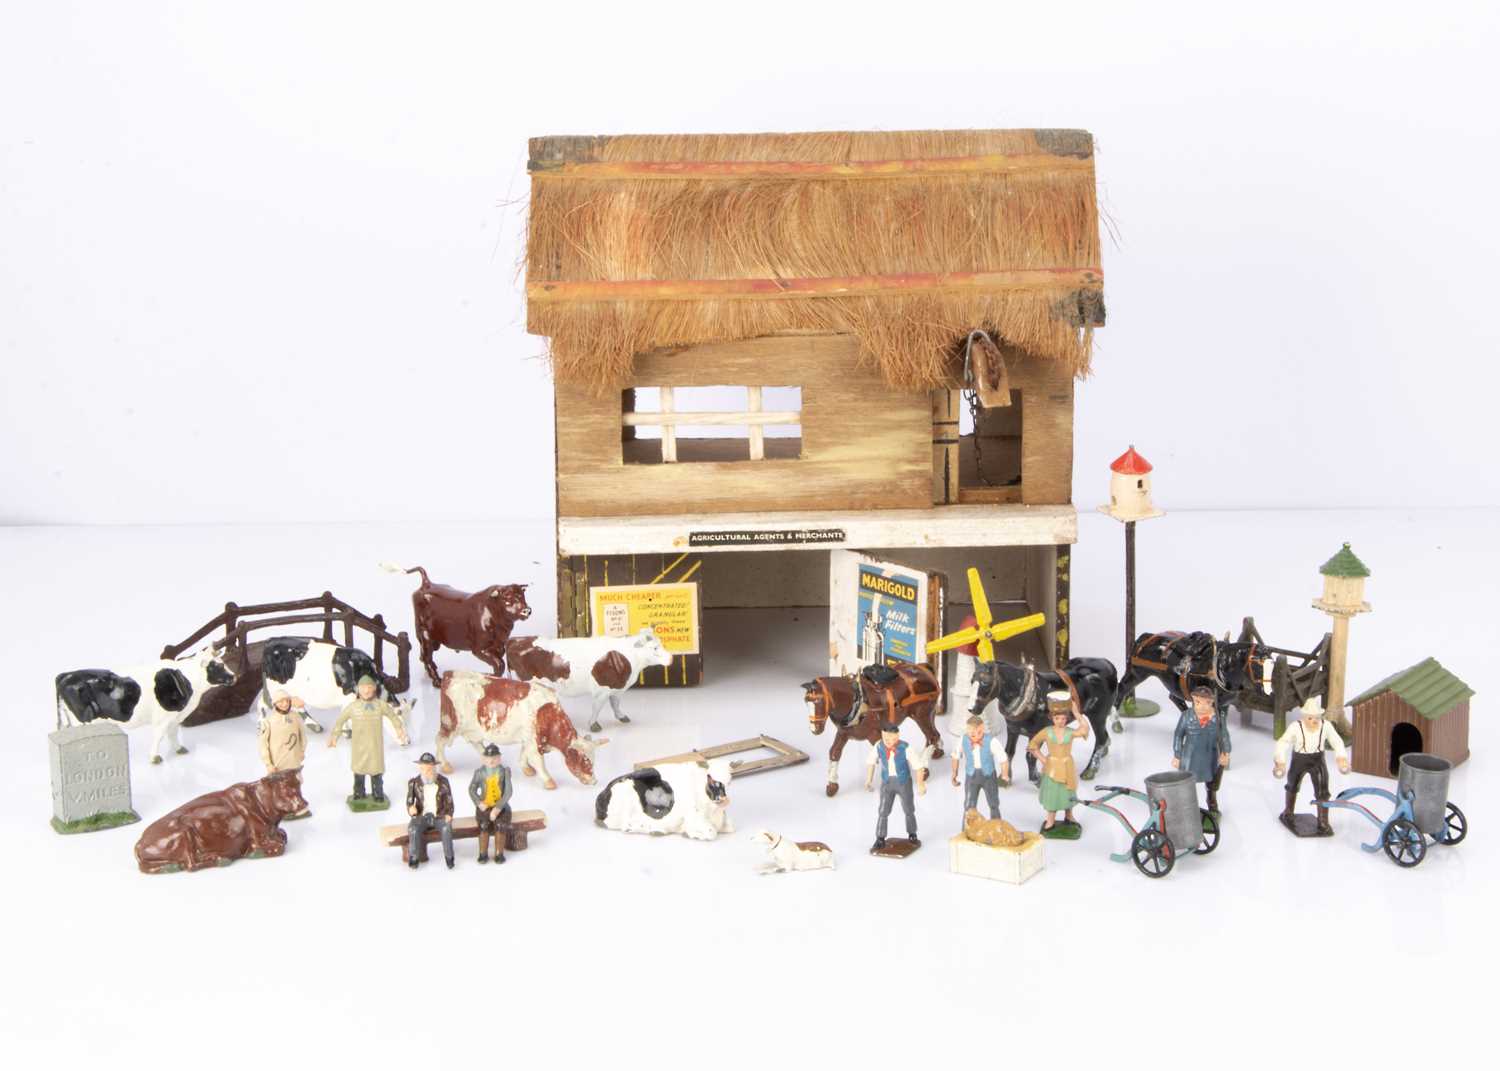 Wooden agricultural or farm building possibly by Amersham Toys with a lot of lead figures and access